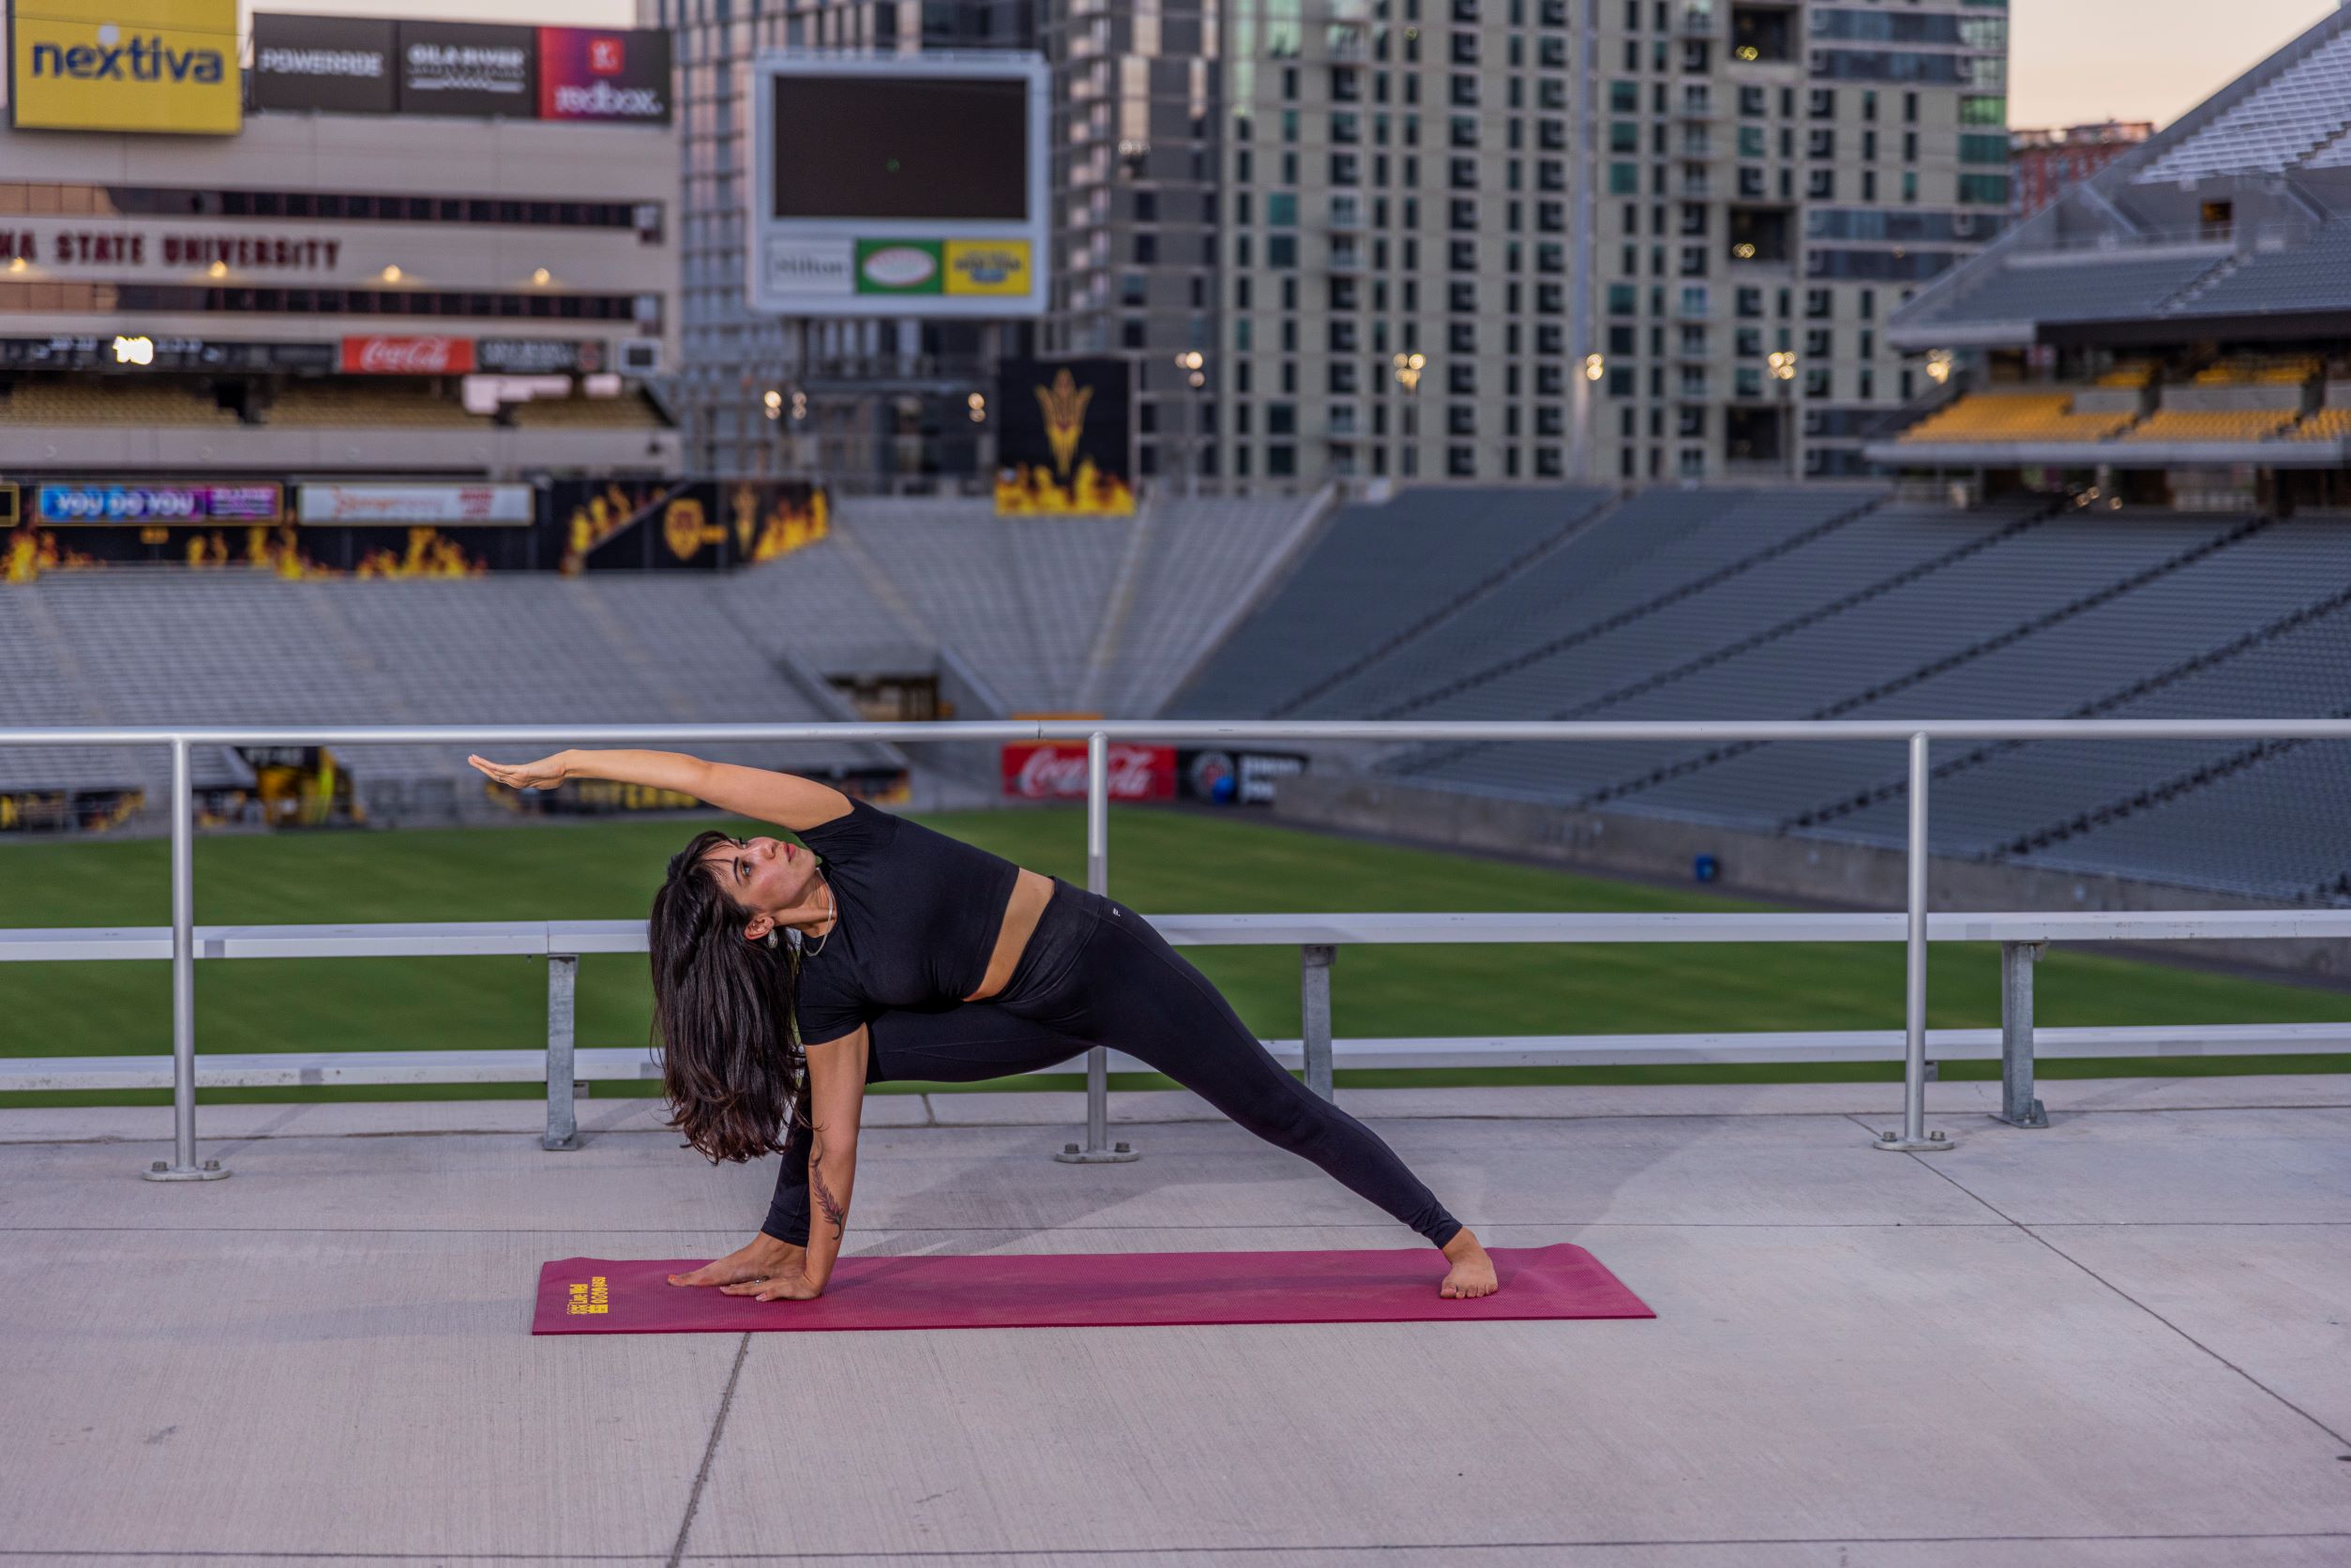 Yoga instructor Biannca Dominguez poses on a yoga mat